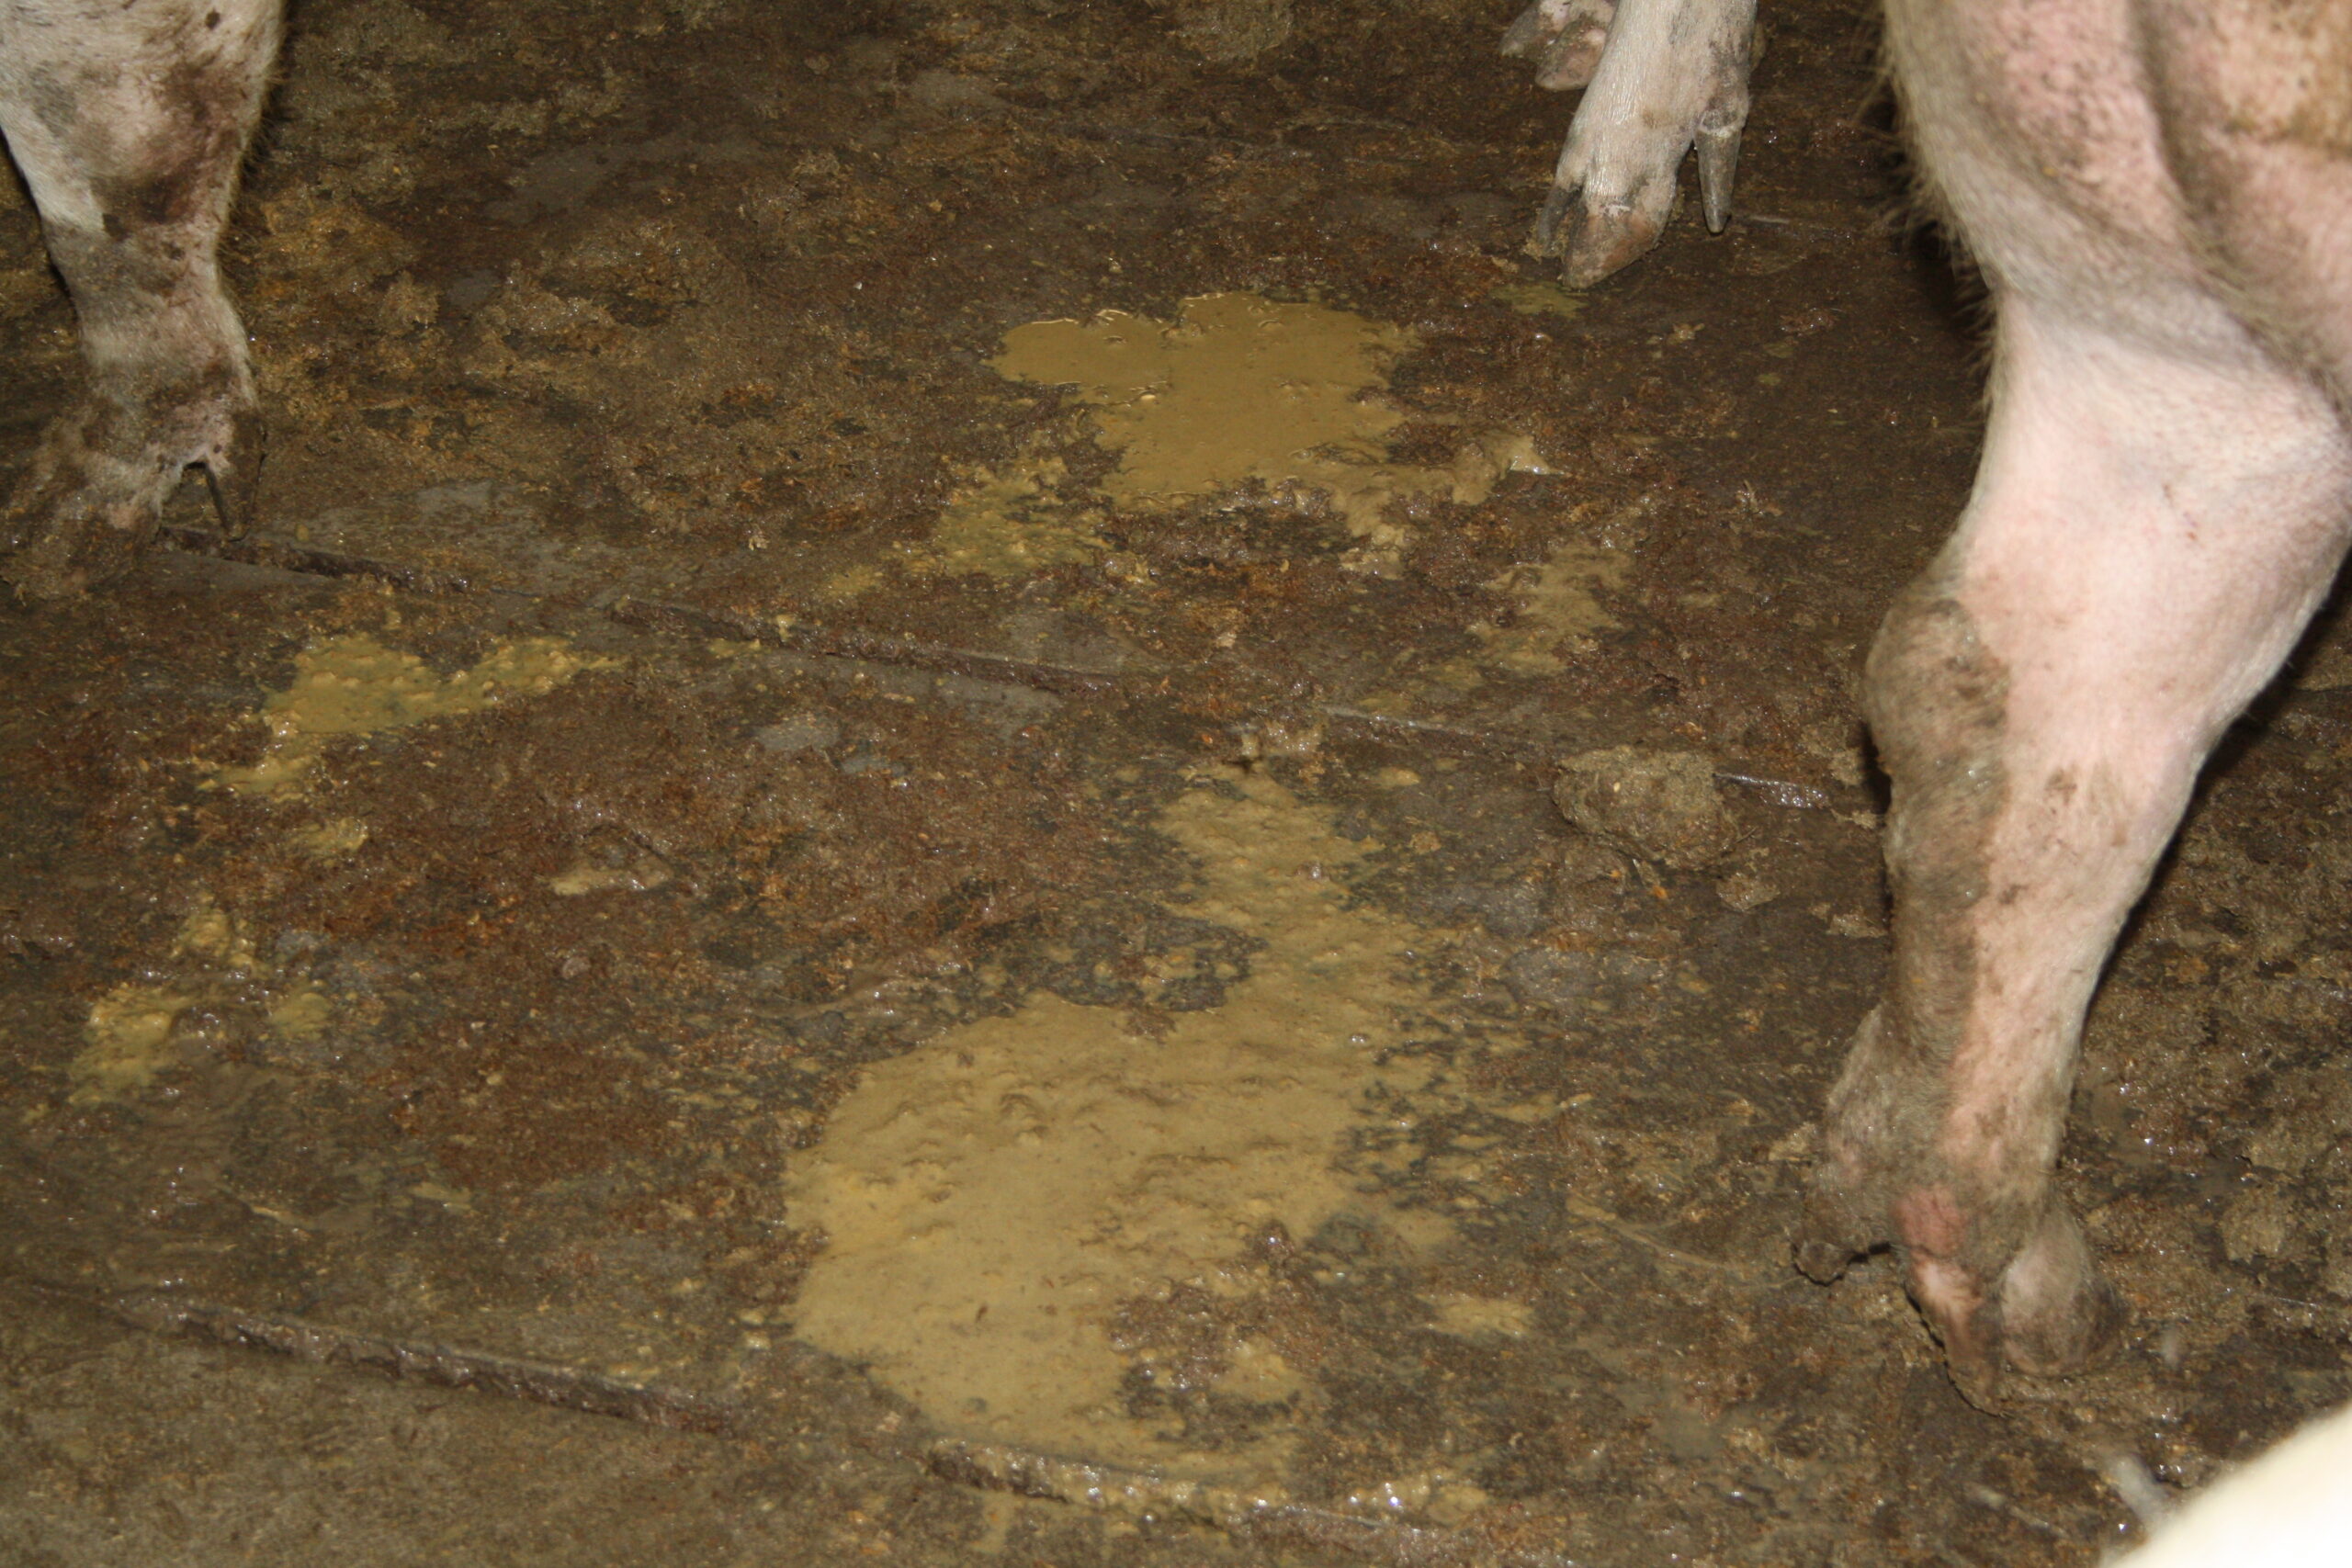 Watery diarrhoea in sows, caused by PEDv. Photo Andrea Ladinig, University Clinic for Swine